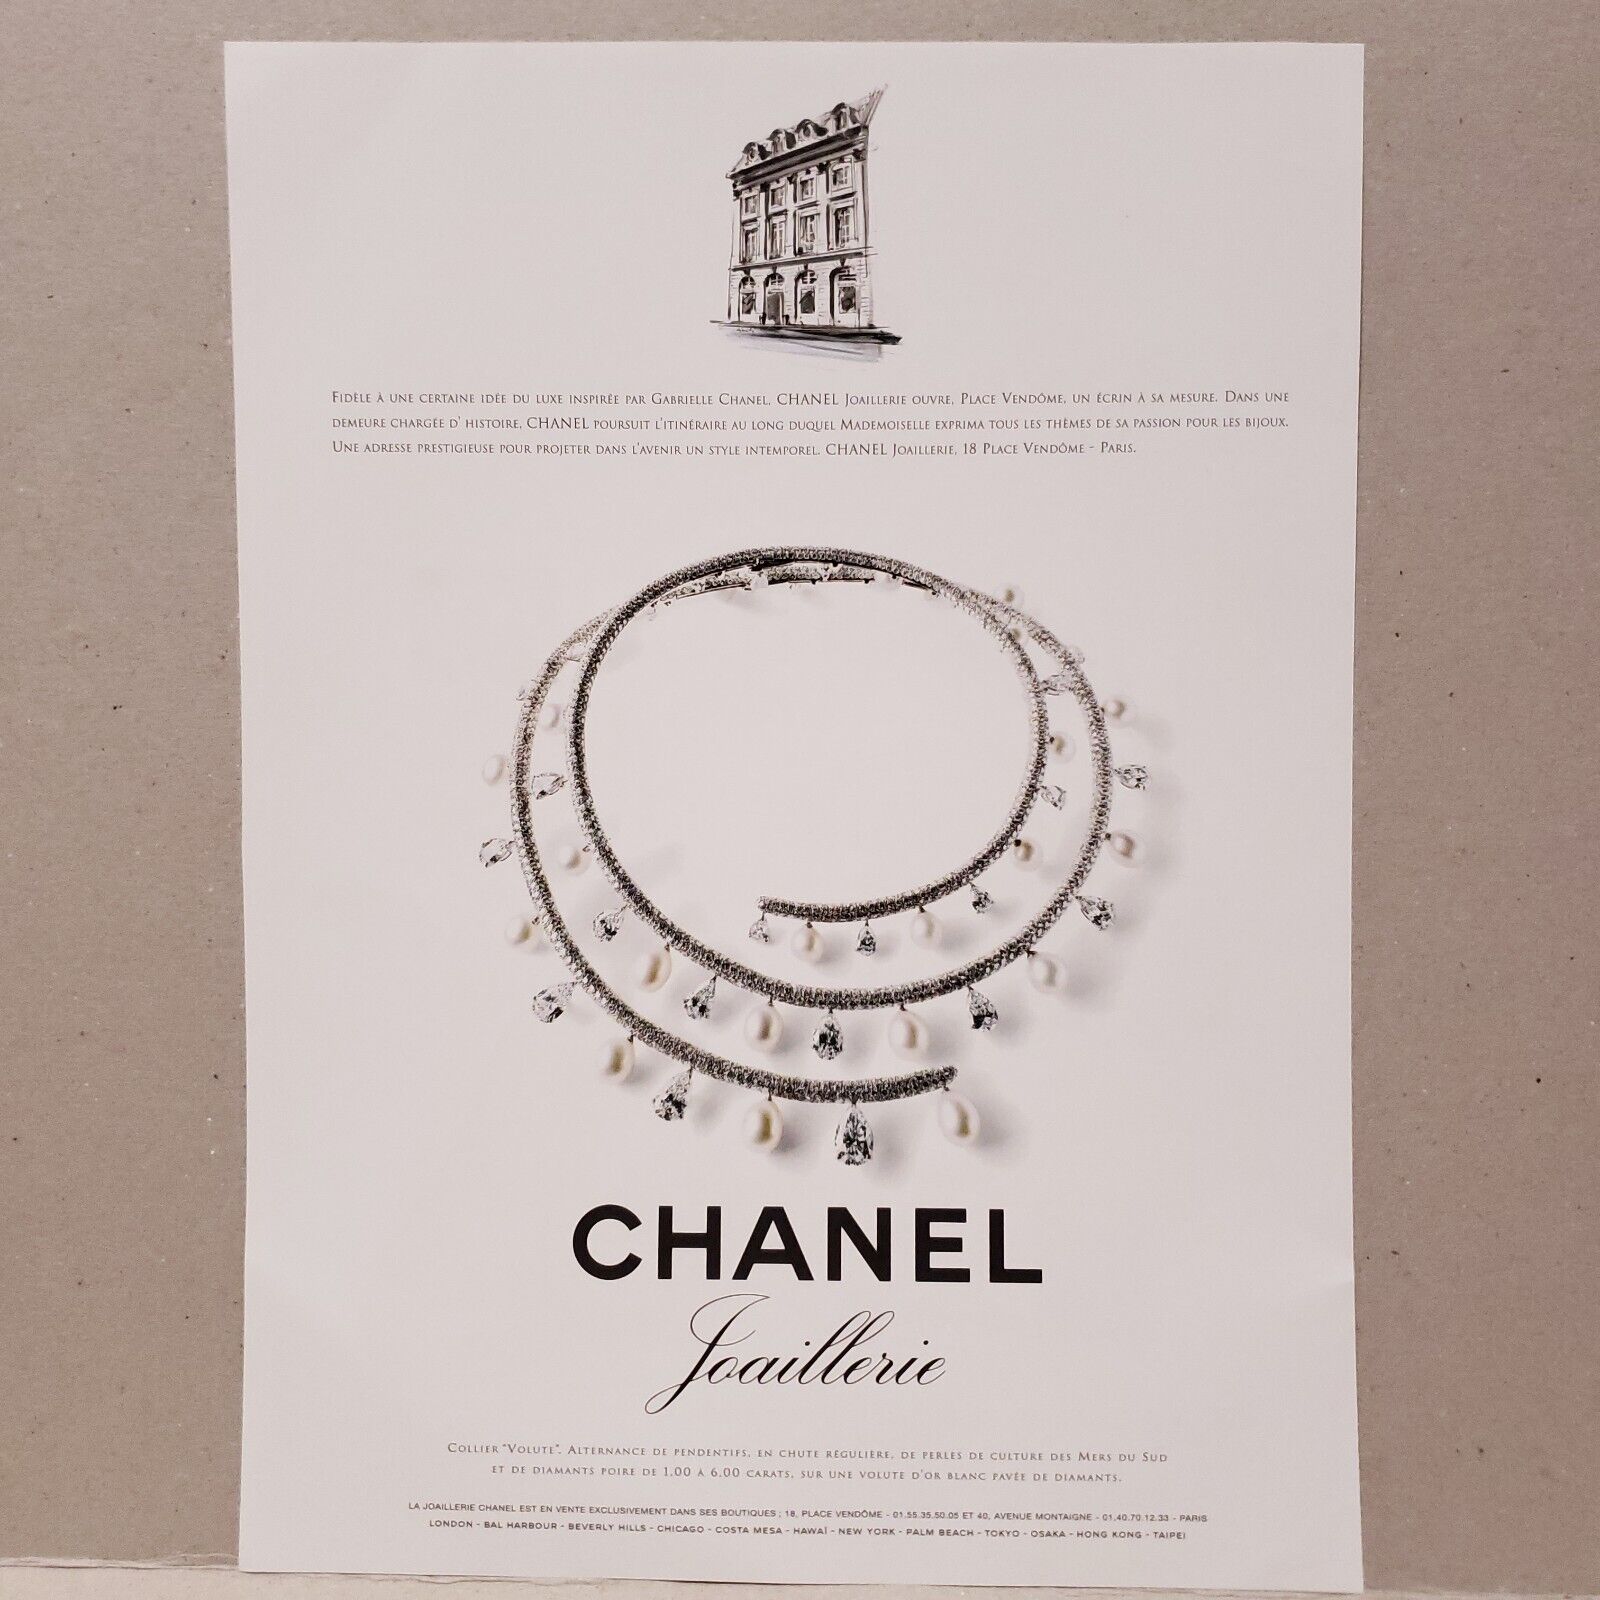 1998 Chanel Jewelry Joaillerie Print Ad Premium Paper 11.75 x 8.75 inches